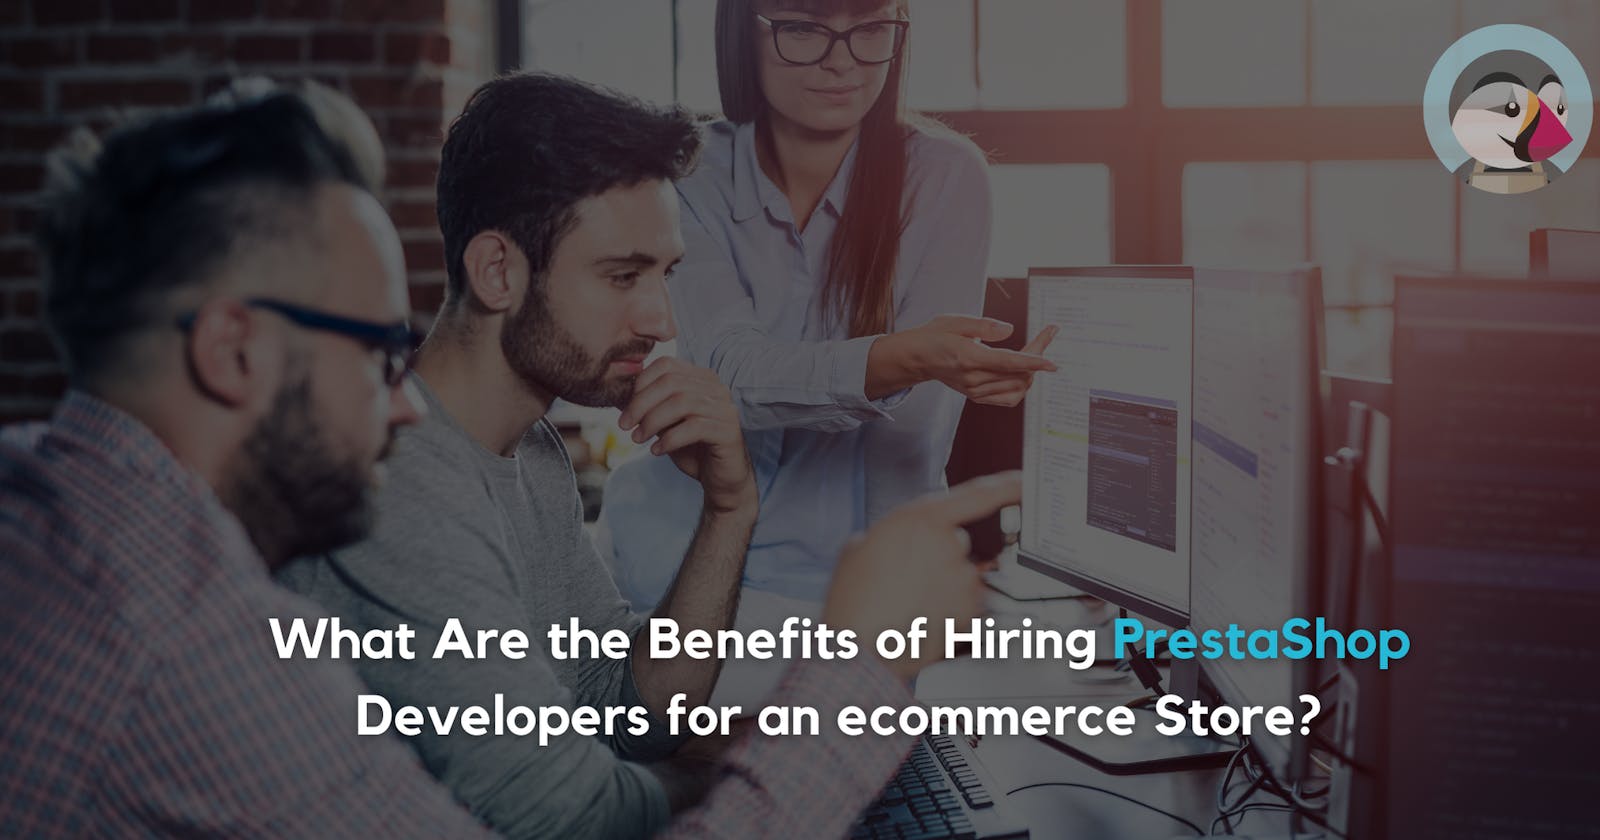 What Are the Benefits of Hiring Prestashop Developers for an ecommerce Store?